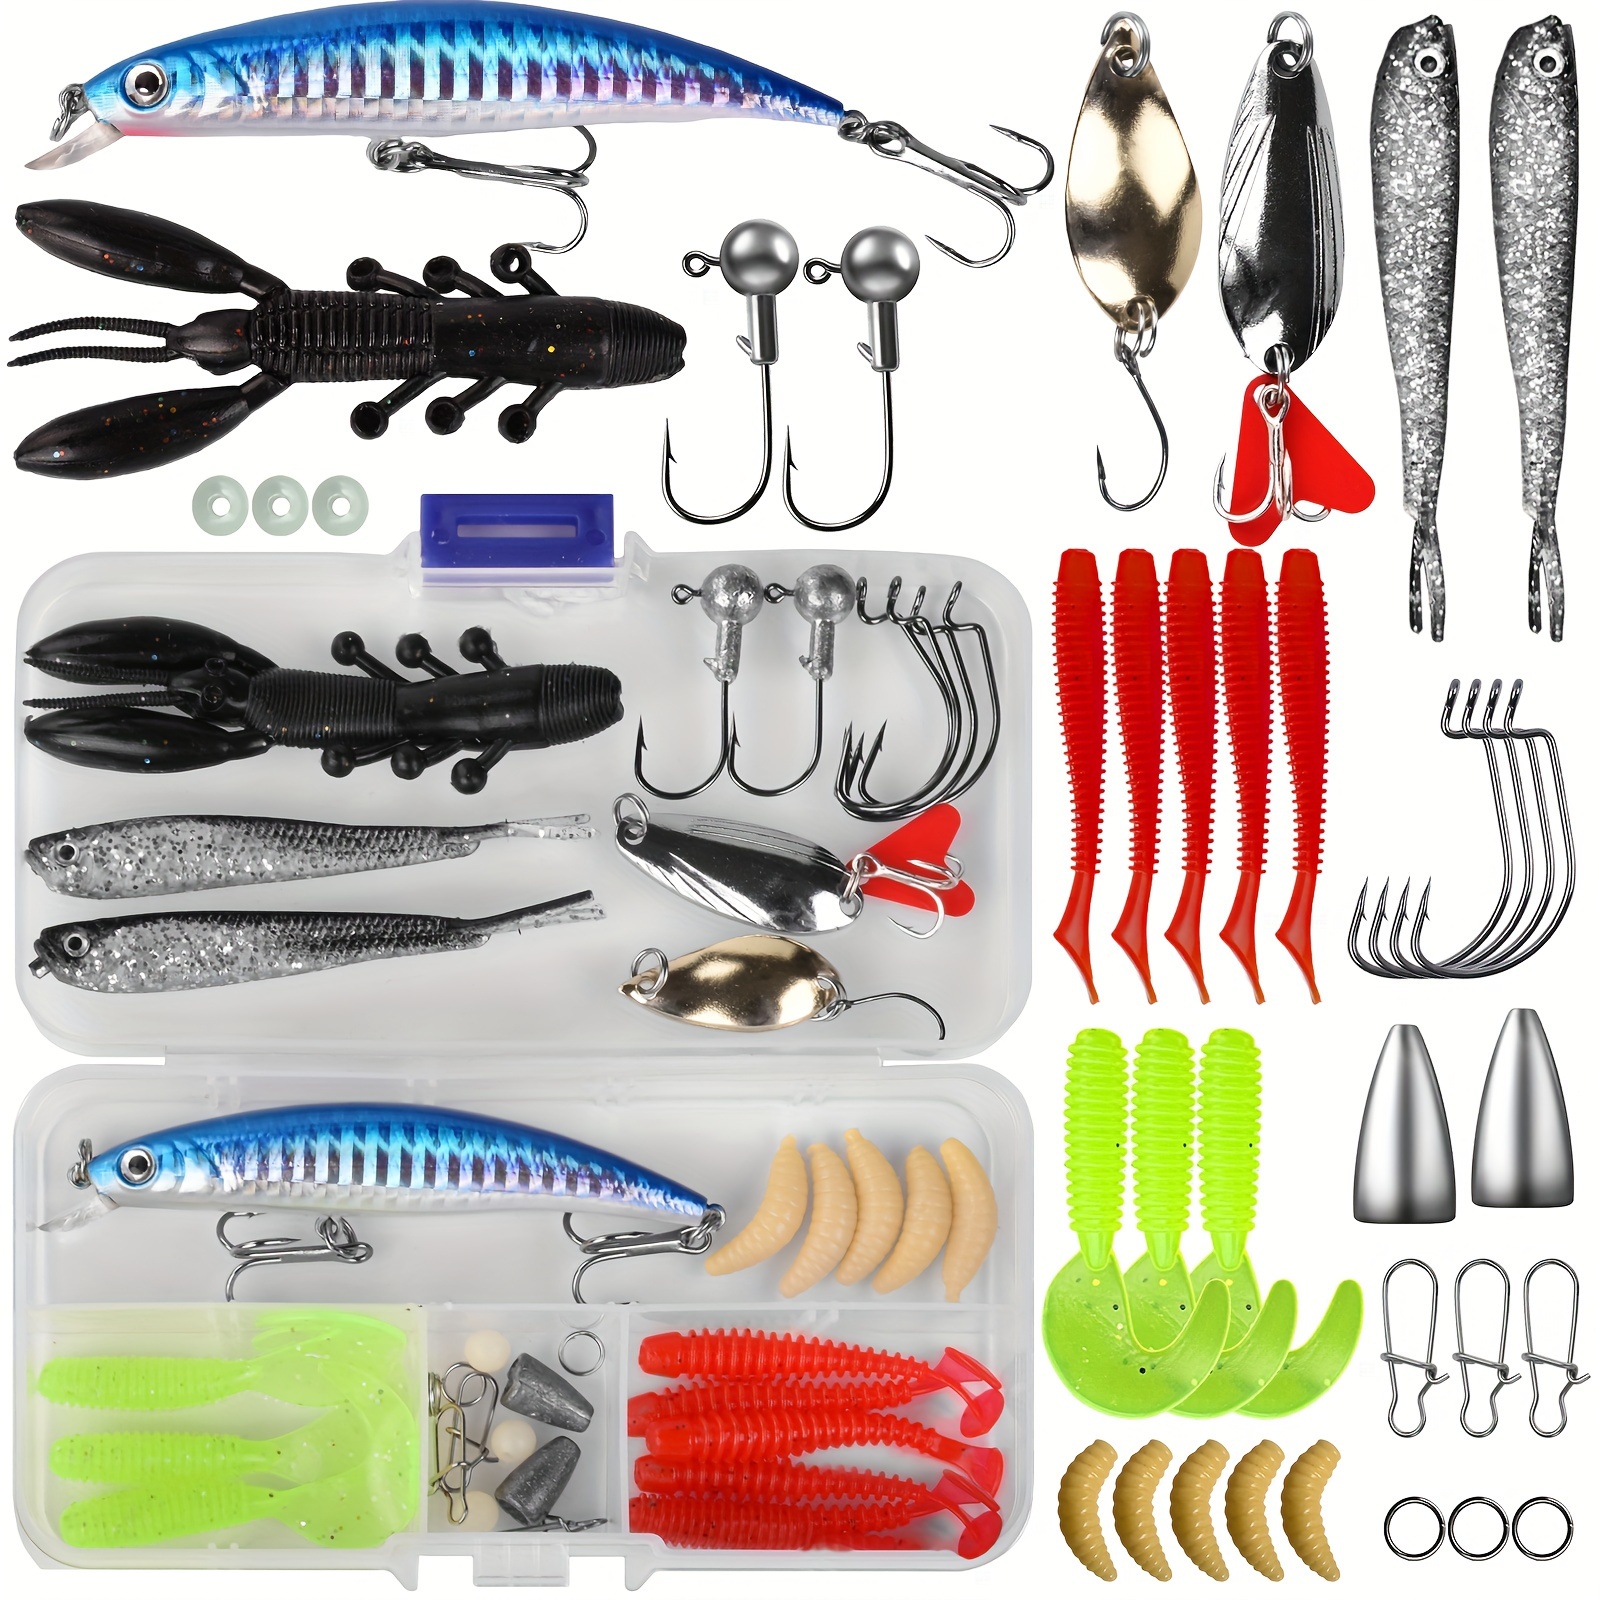 36/63/70/102pcs Freshwater Lures Fishing Kit - Perfect For Bass, Trout,  Salmon & More - Includes Mino Soft Frog, Bionic Soft Bait, & More!